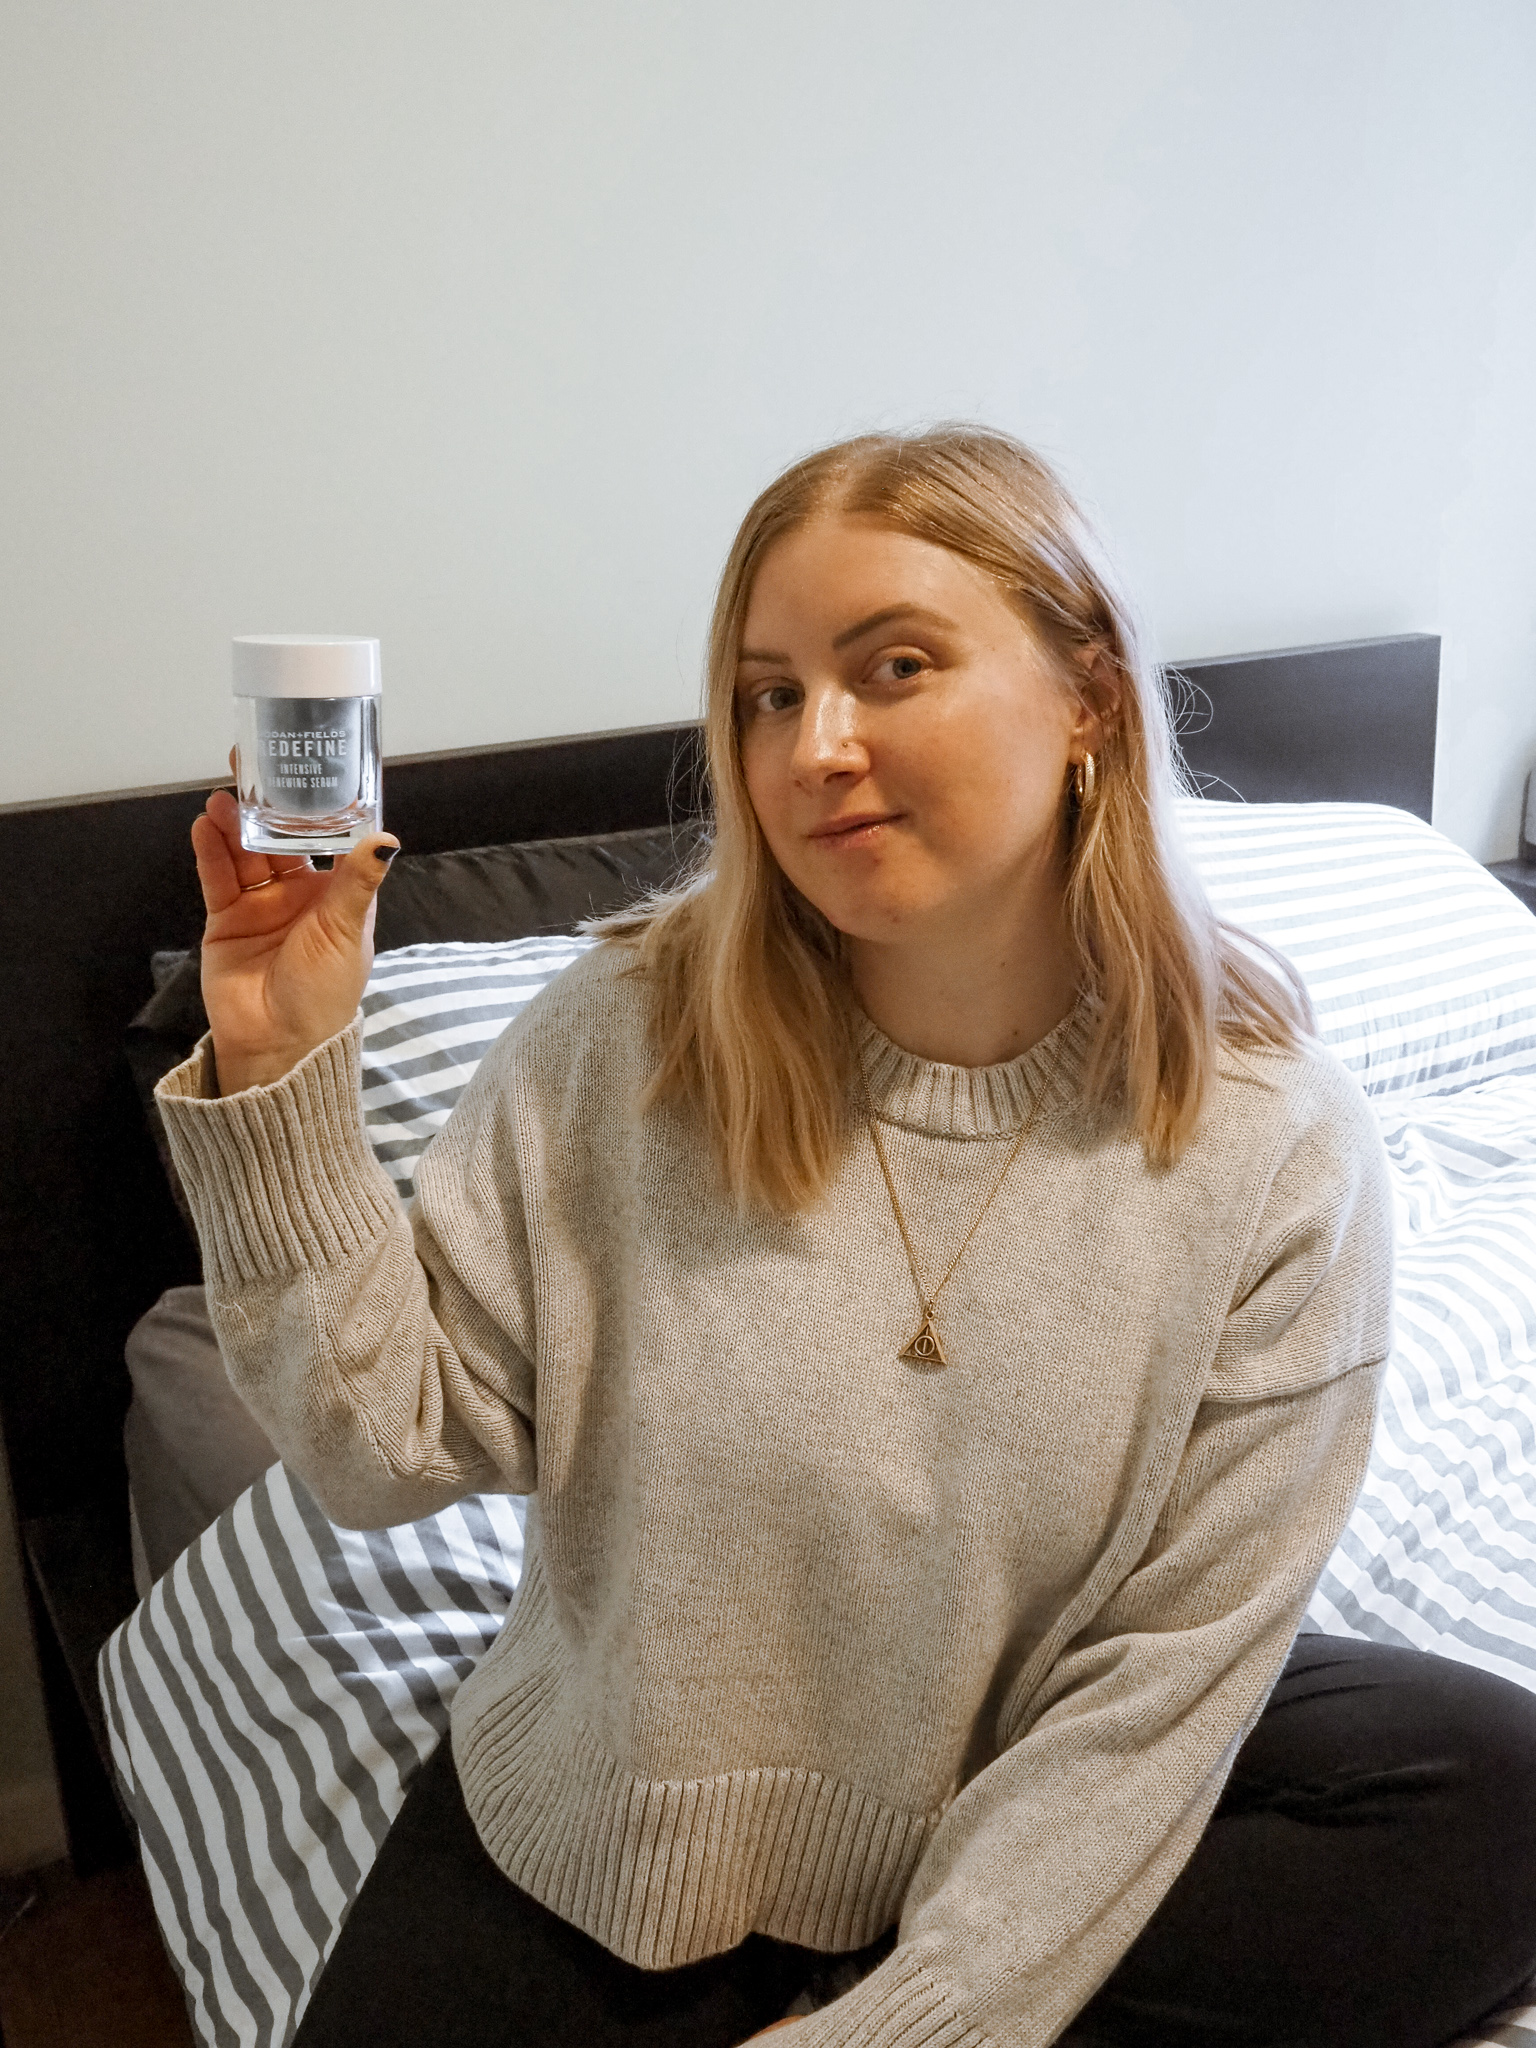 Kelsey from Blondes & Bagels reviews the new Rodan + Fields Intensive Renewing Serum. Find out the pros and cons of this new night serum!